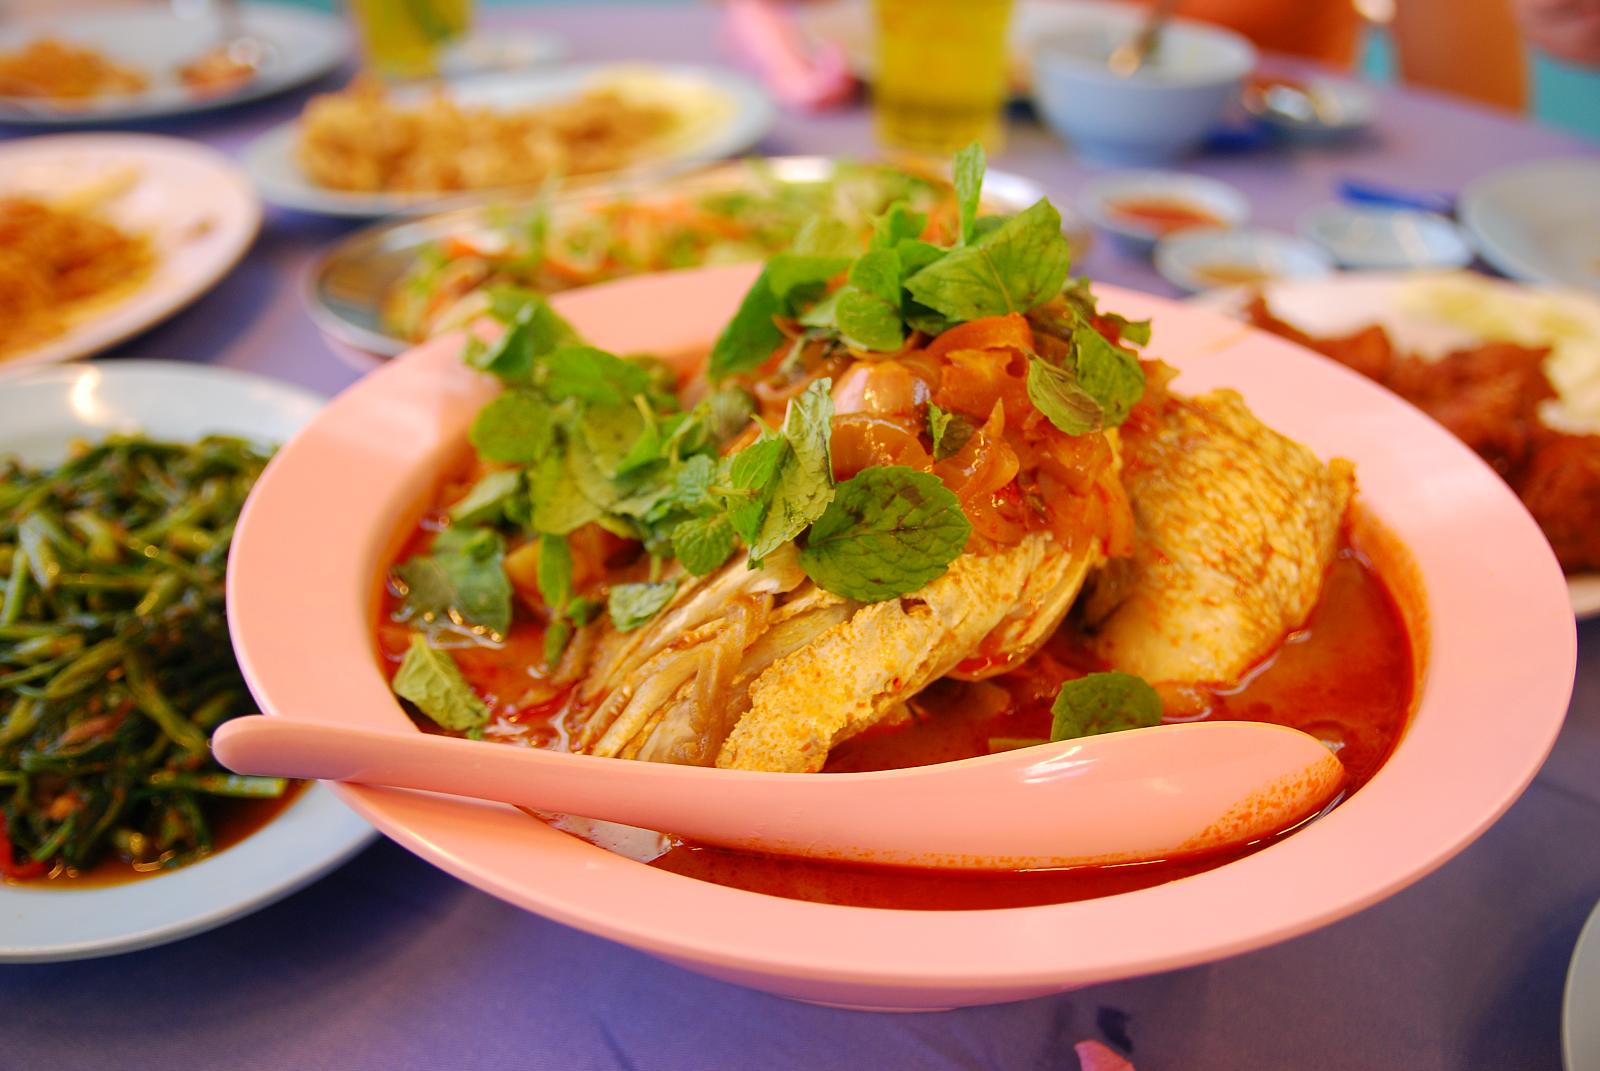 Penang Food: 12 Soul-Satisfying Dishes Worth Your Malaysia Trip